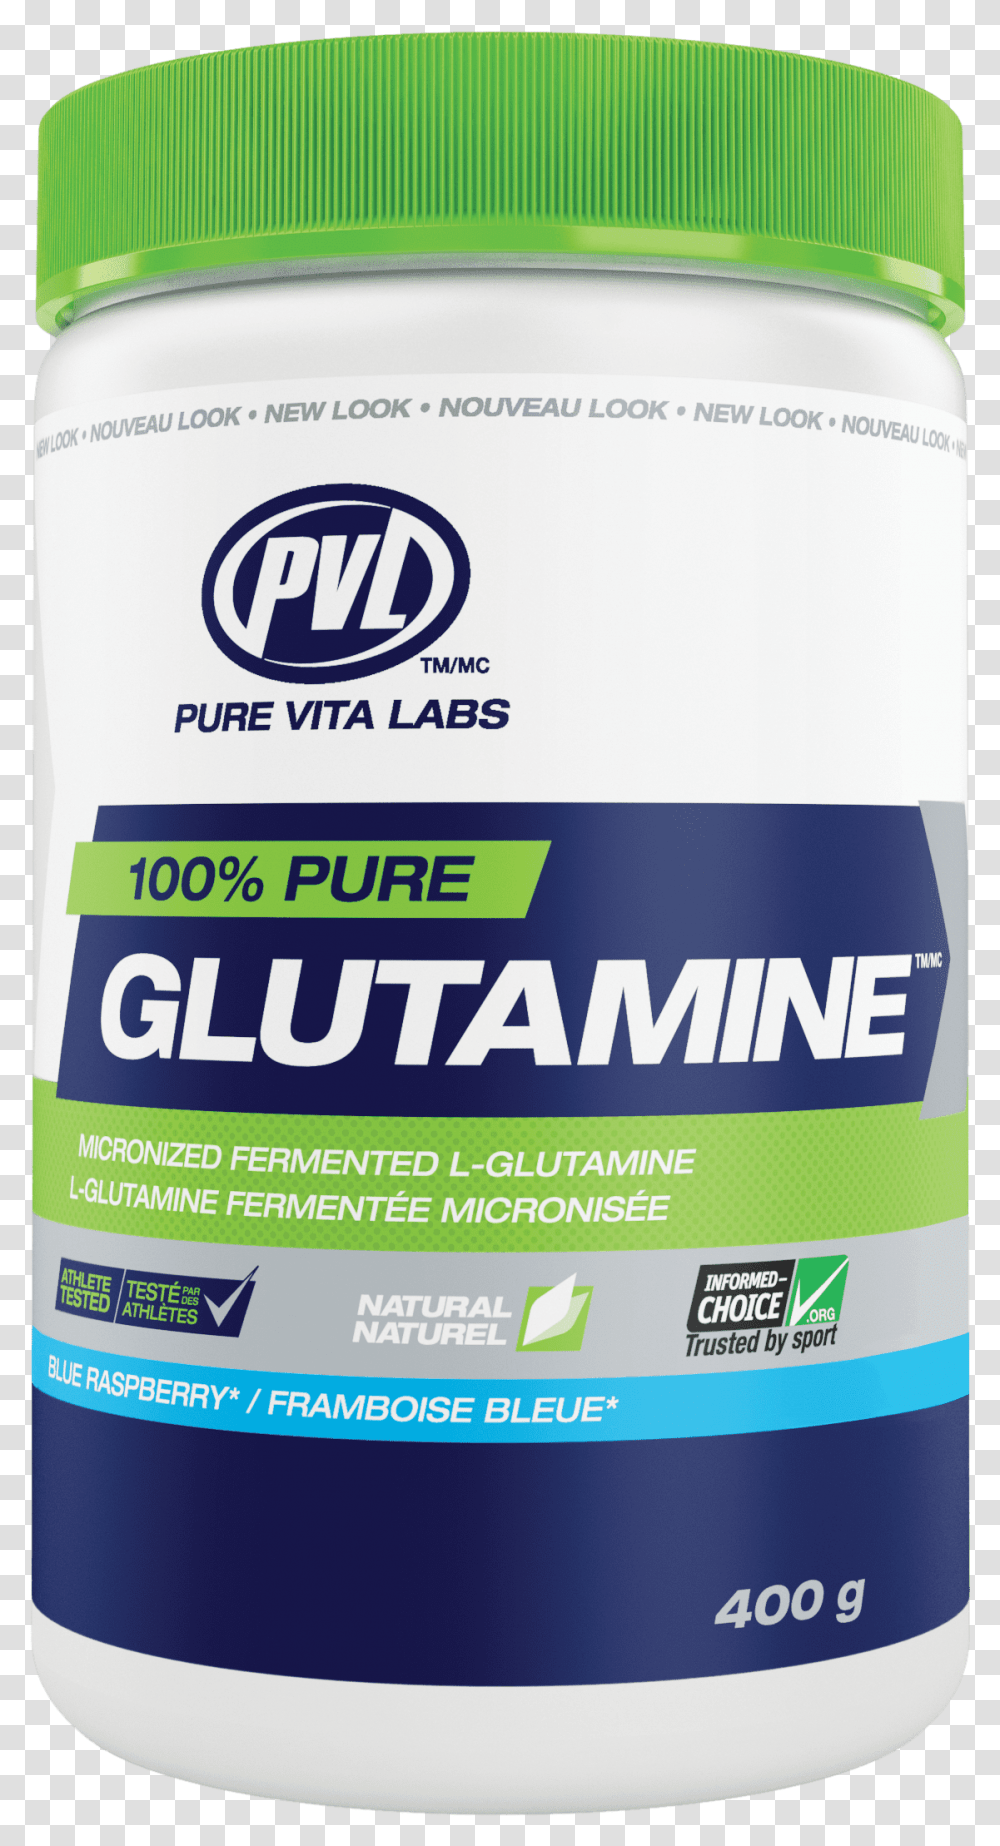 Pvl 100 Pure Glutamine, Cosmetics, Paint Container, Label Transparent Png